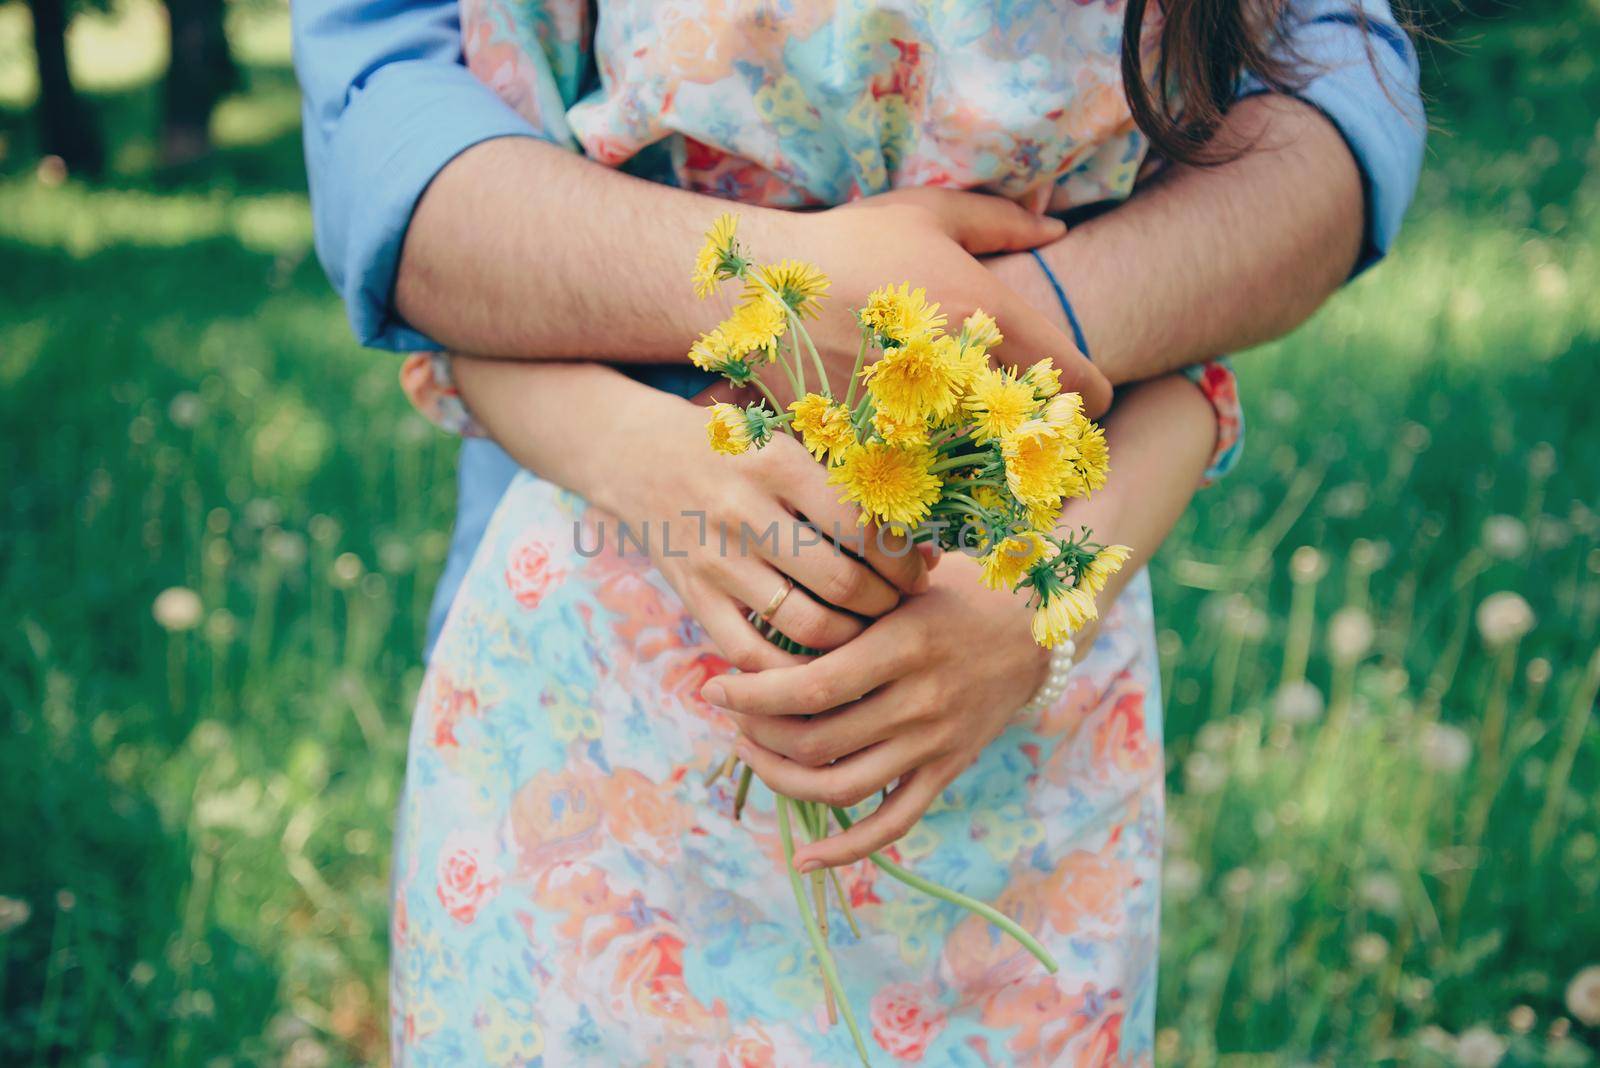 Married couple in love, man embraces a woman in summer park. Woman holding bouquet of yellow dandelions. Focus on flowers